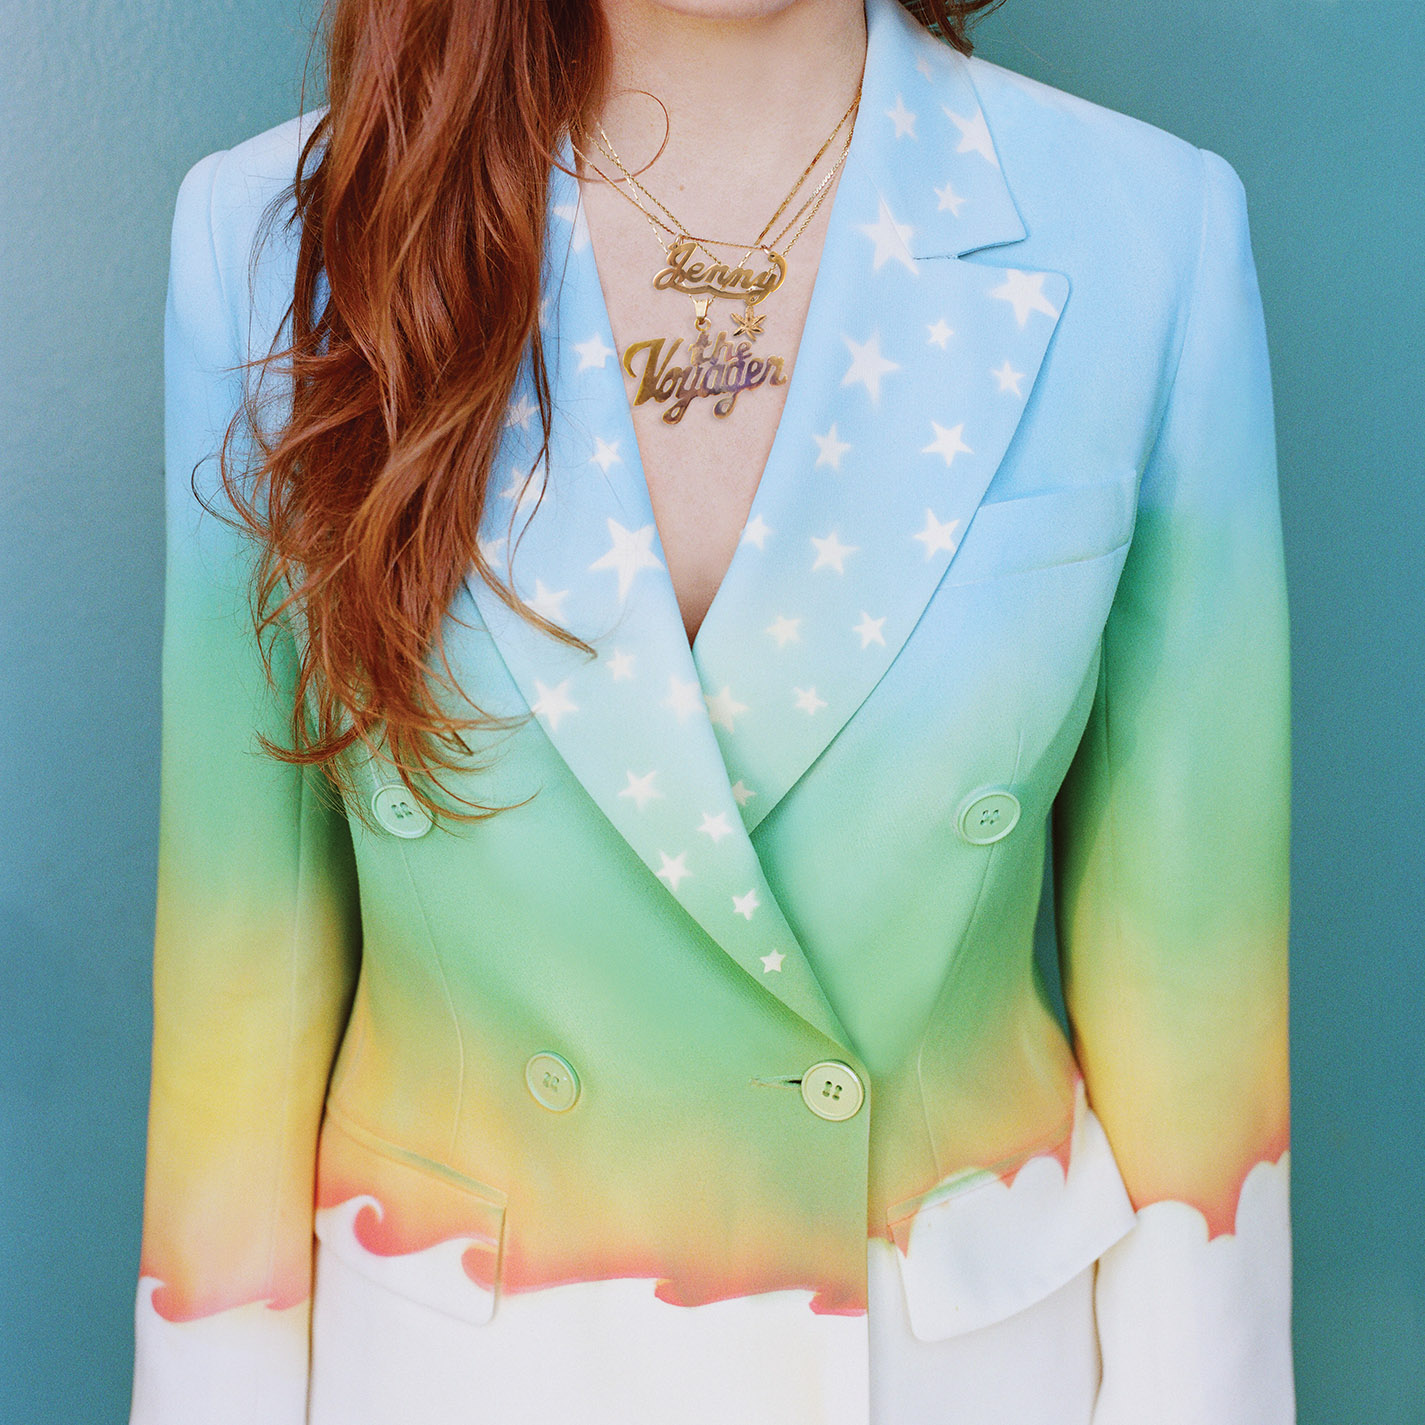 Album artwork for Jenny Lewis' new solo album "The Voyager," due out in July.
